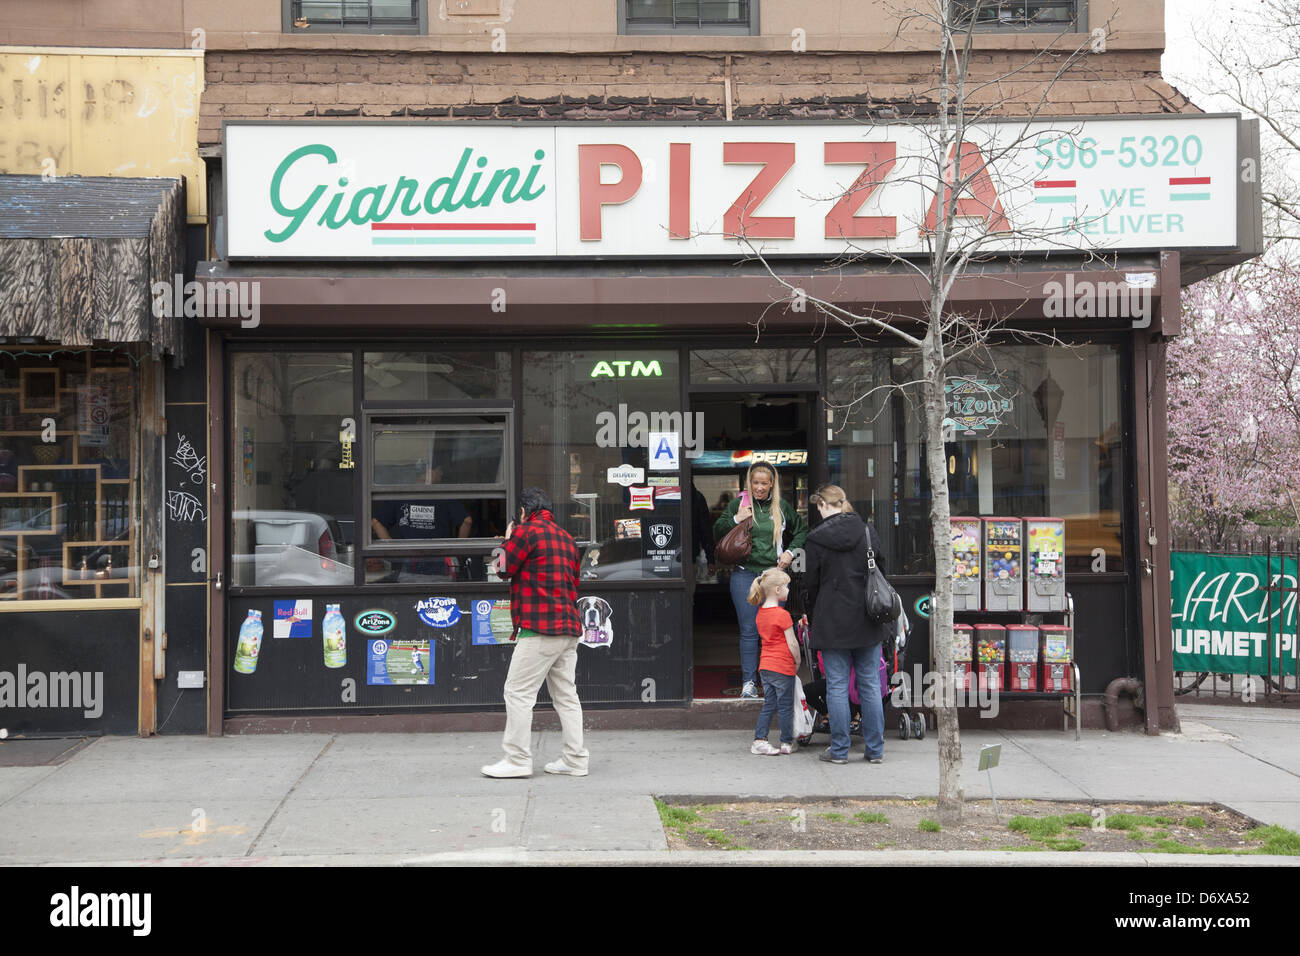 Pizza parlor on Smith St. in the Carroll Gardens neighborhood of Brooklyn, NY. Stock Photo